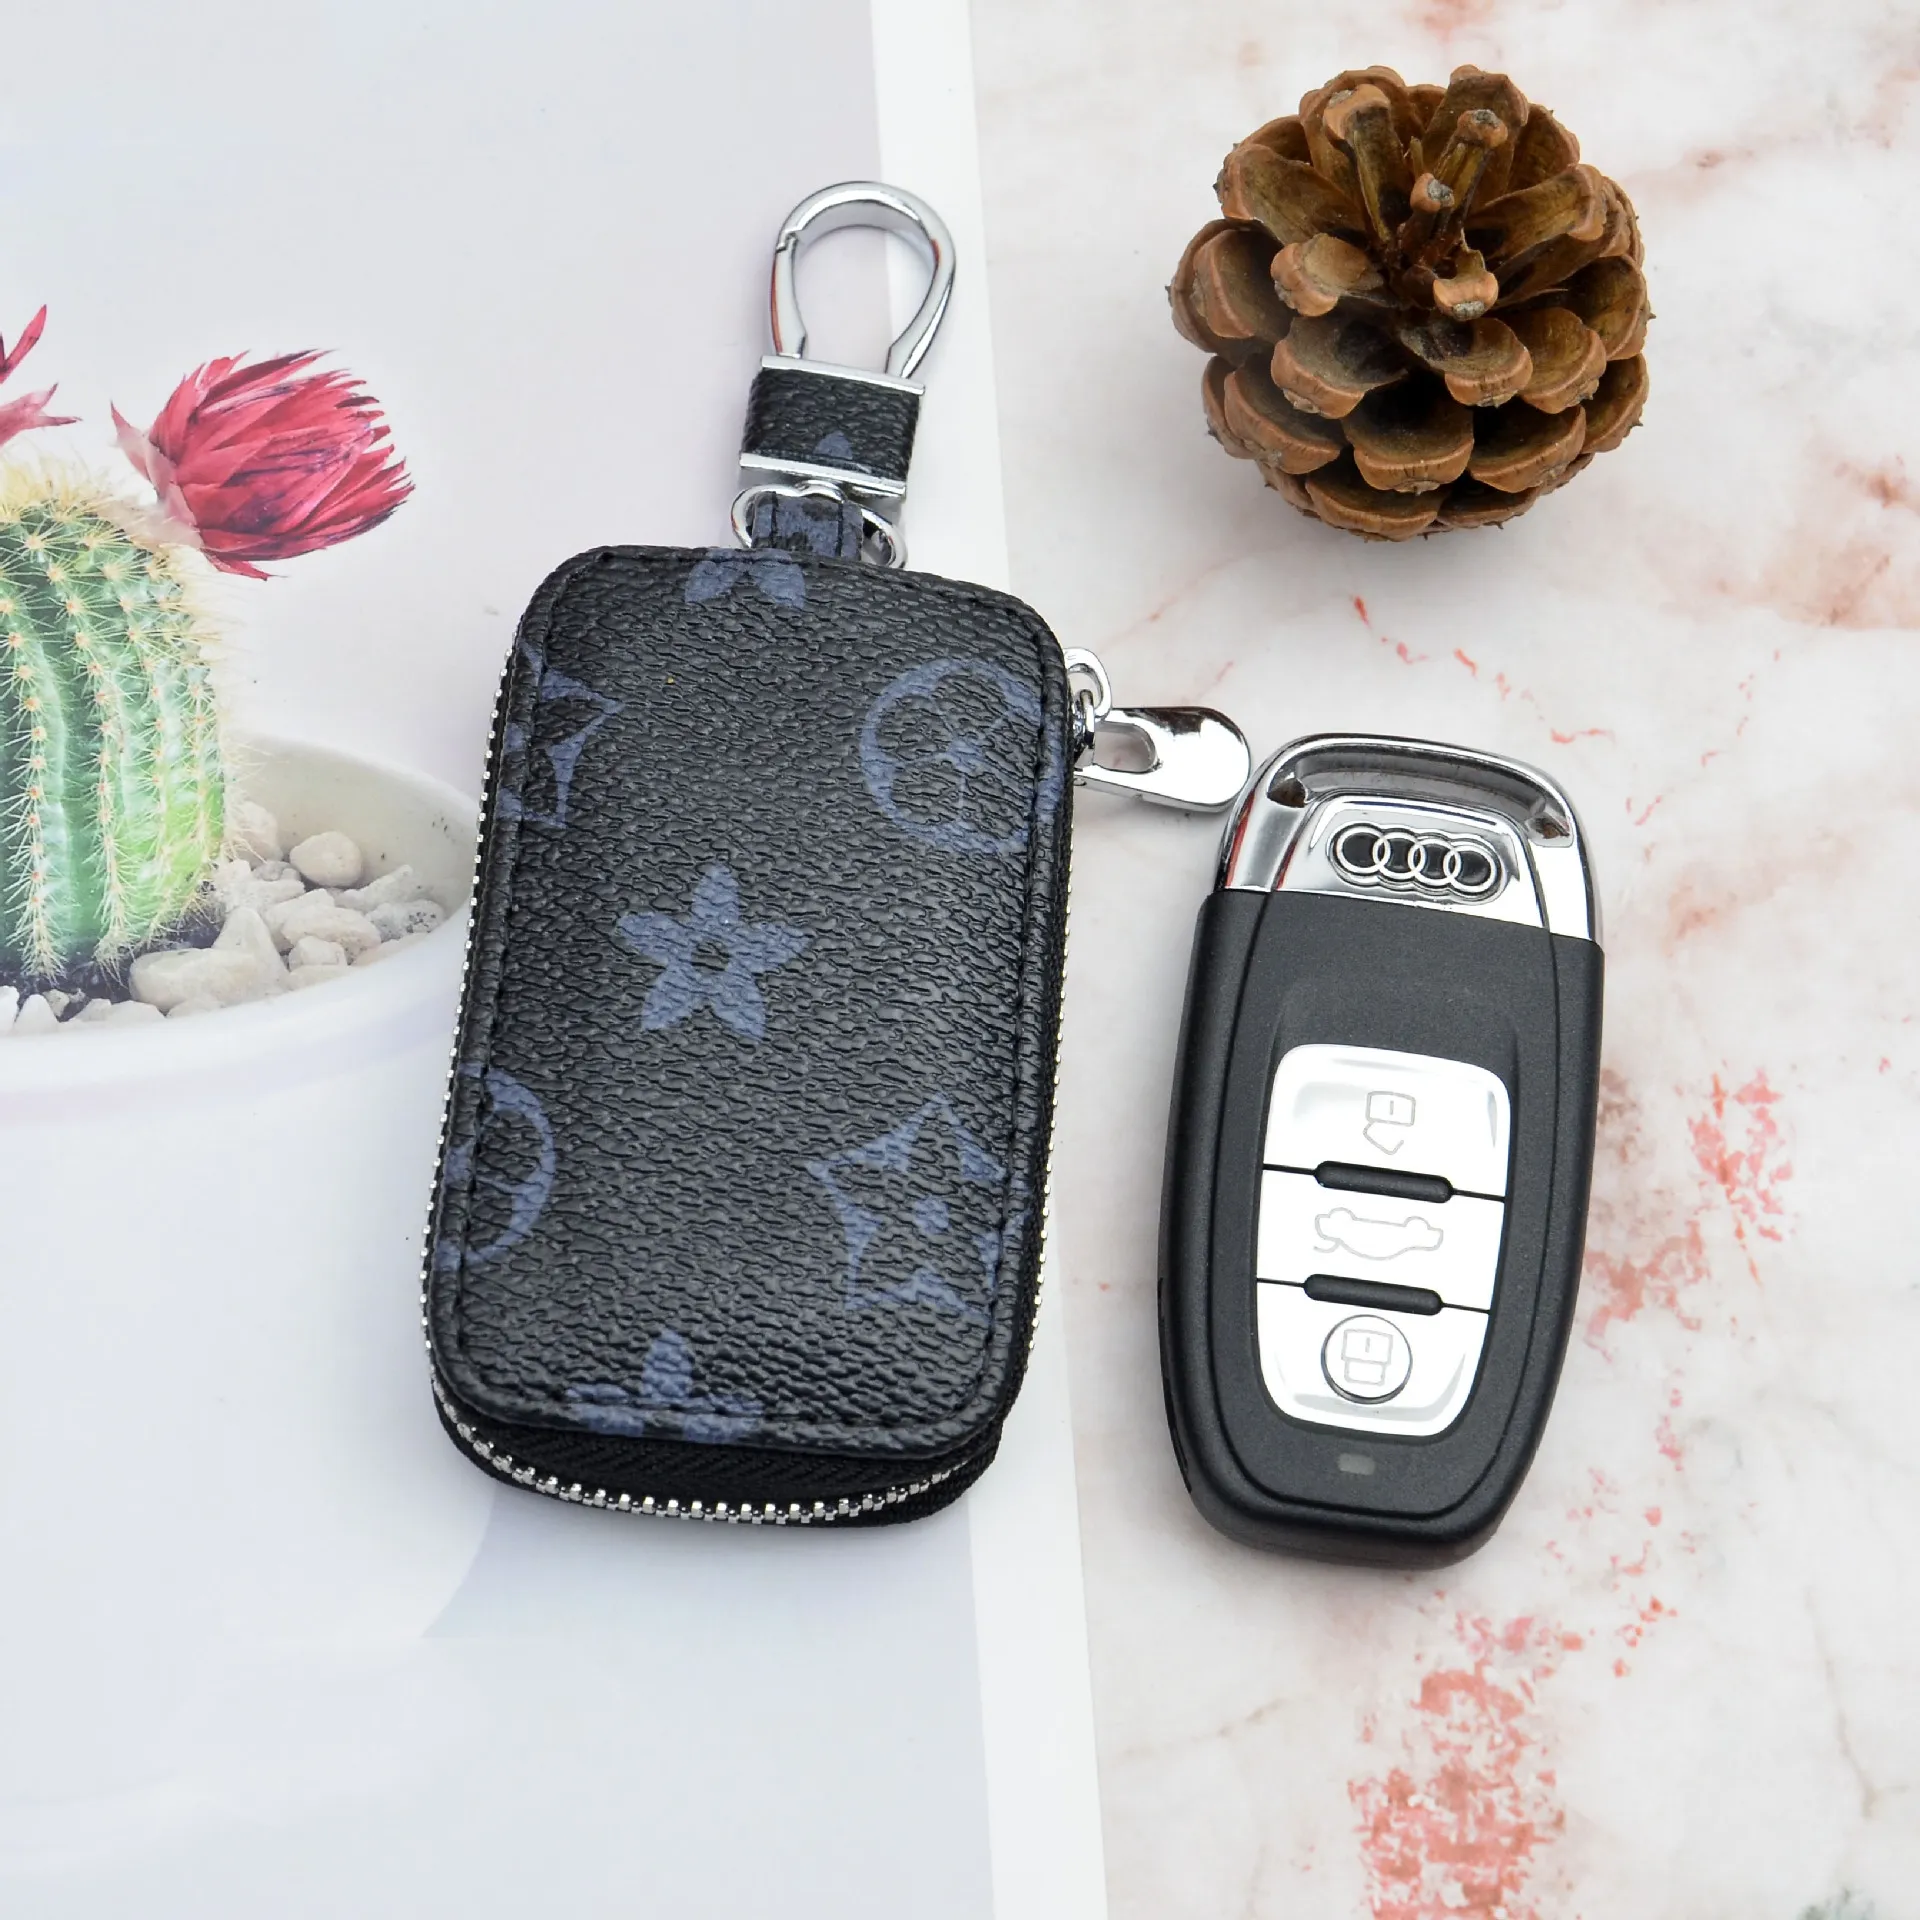 Flower Plaid PU Leather Car Key Holder Travelon Bags Keychain With Silver  Metal Pendant Fashionable Accessory For Jewelry Gifts From Yambags, $4.55